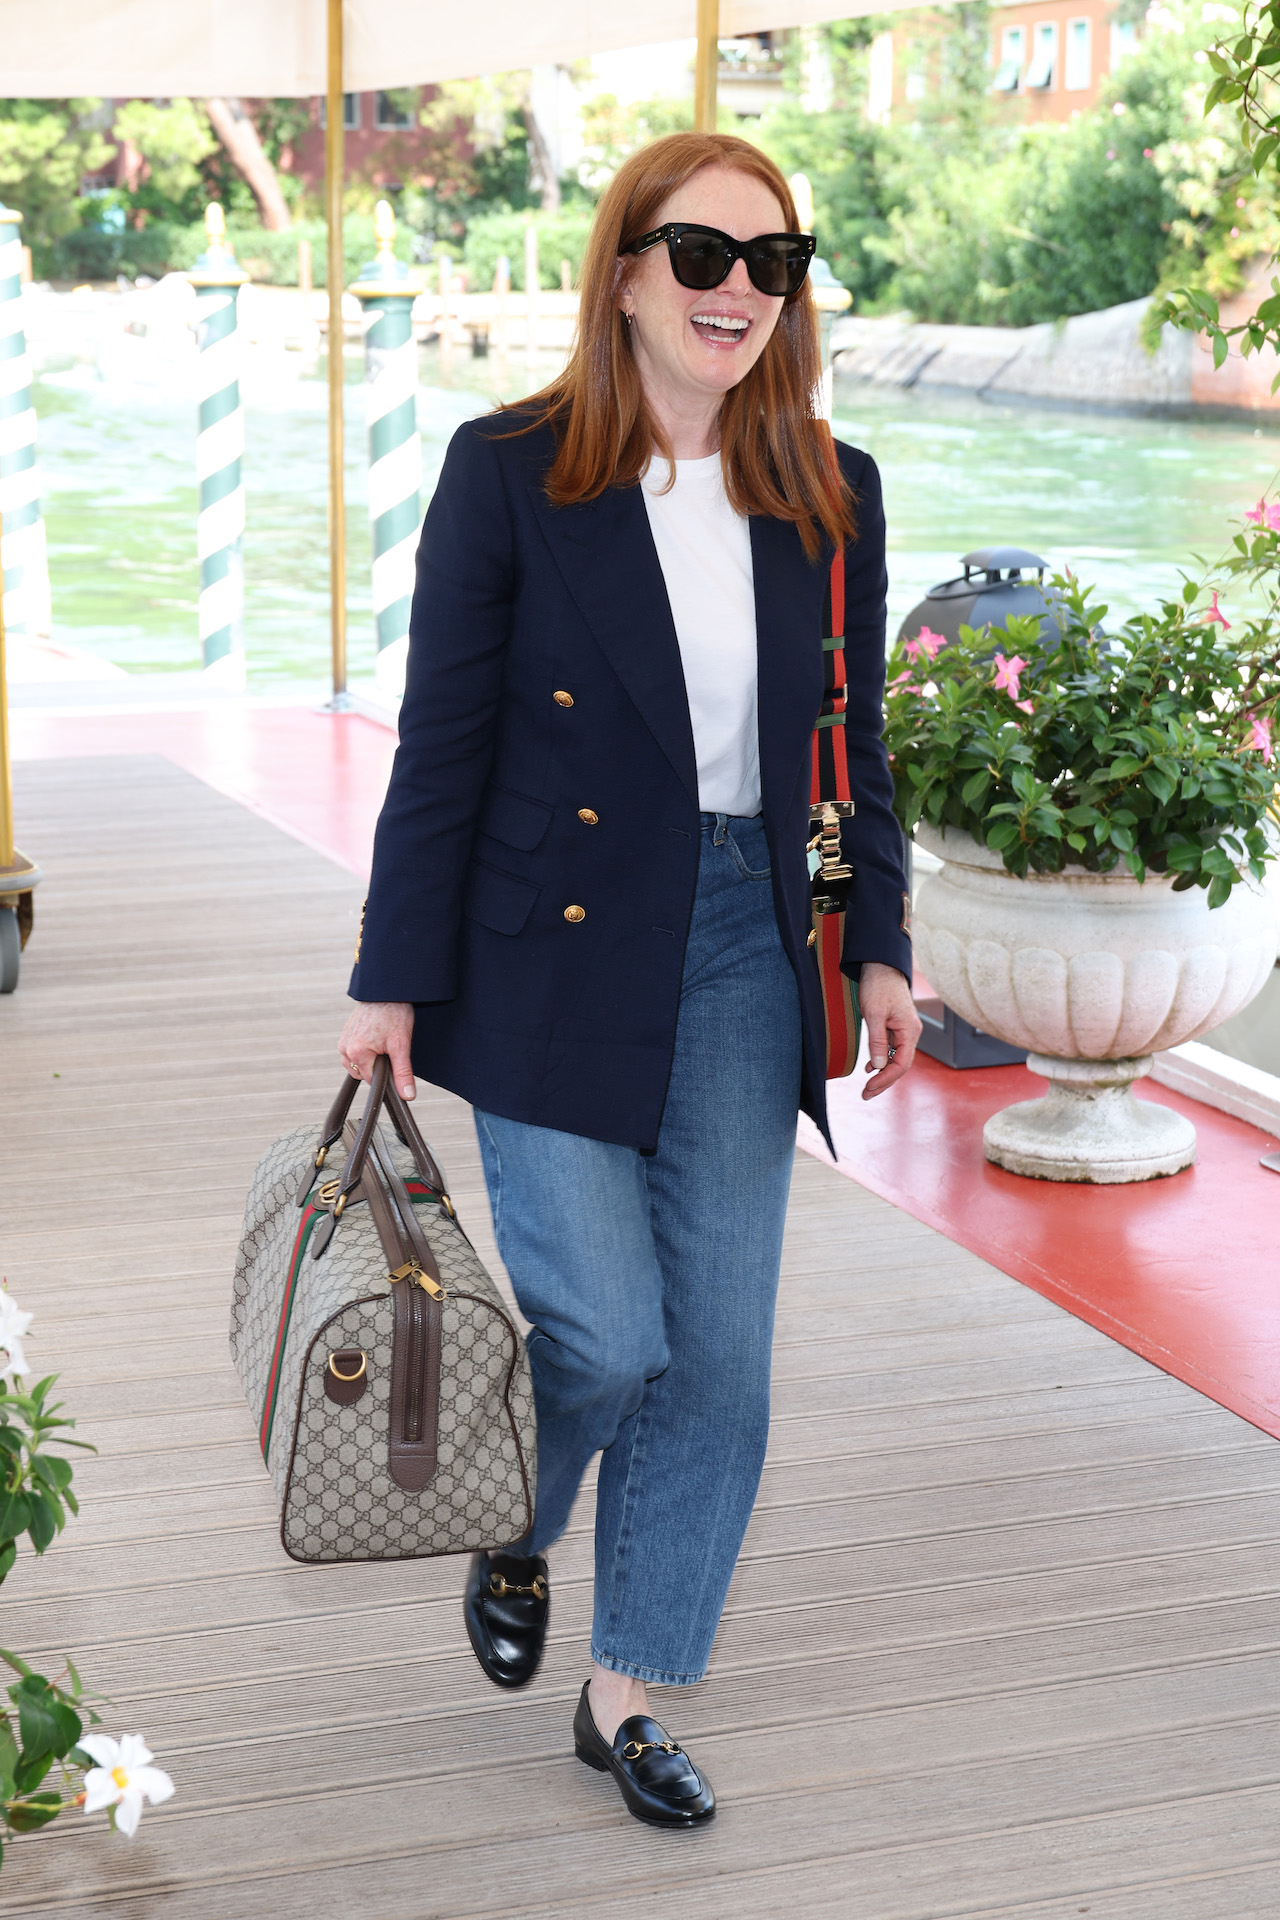 Gucci - Cate Blanchett spotted in Venice carrying the new